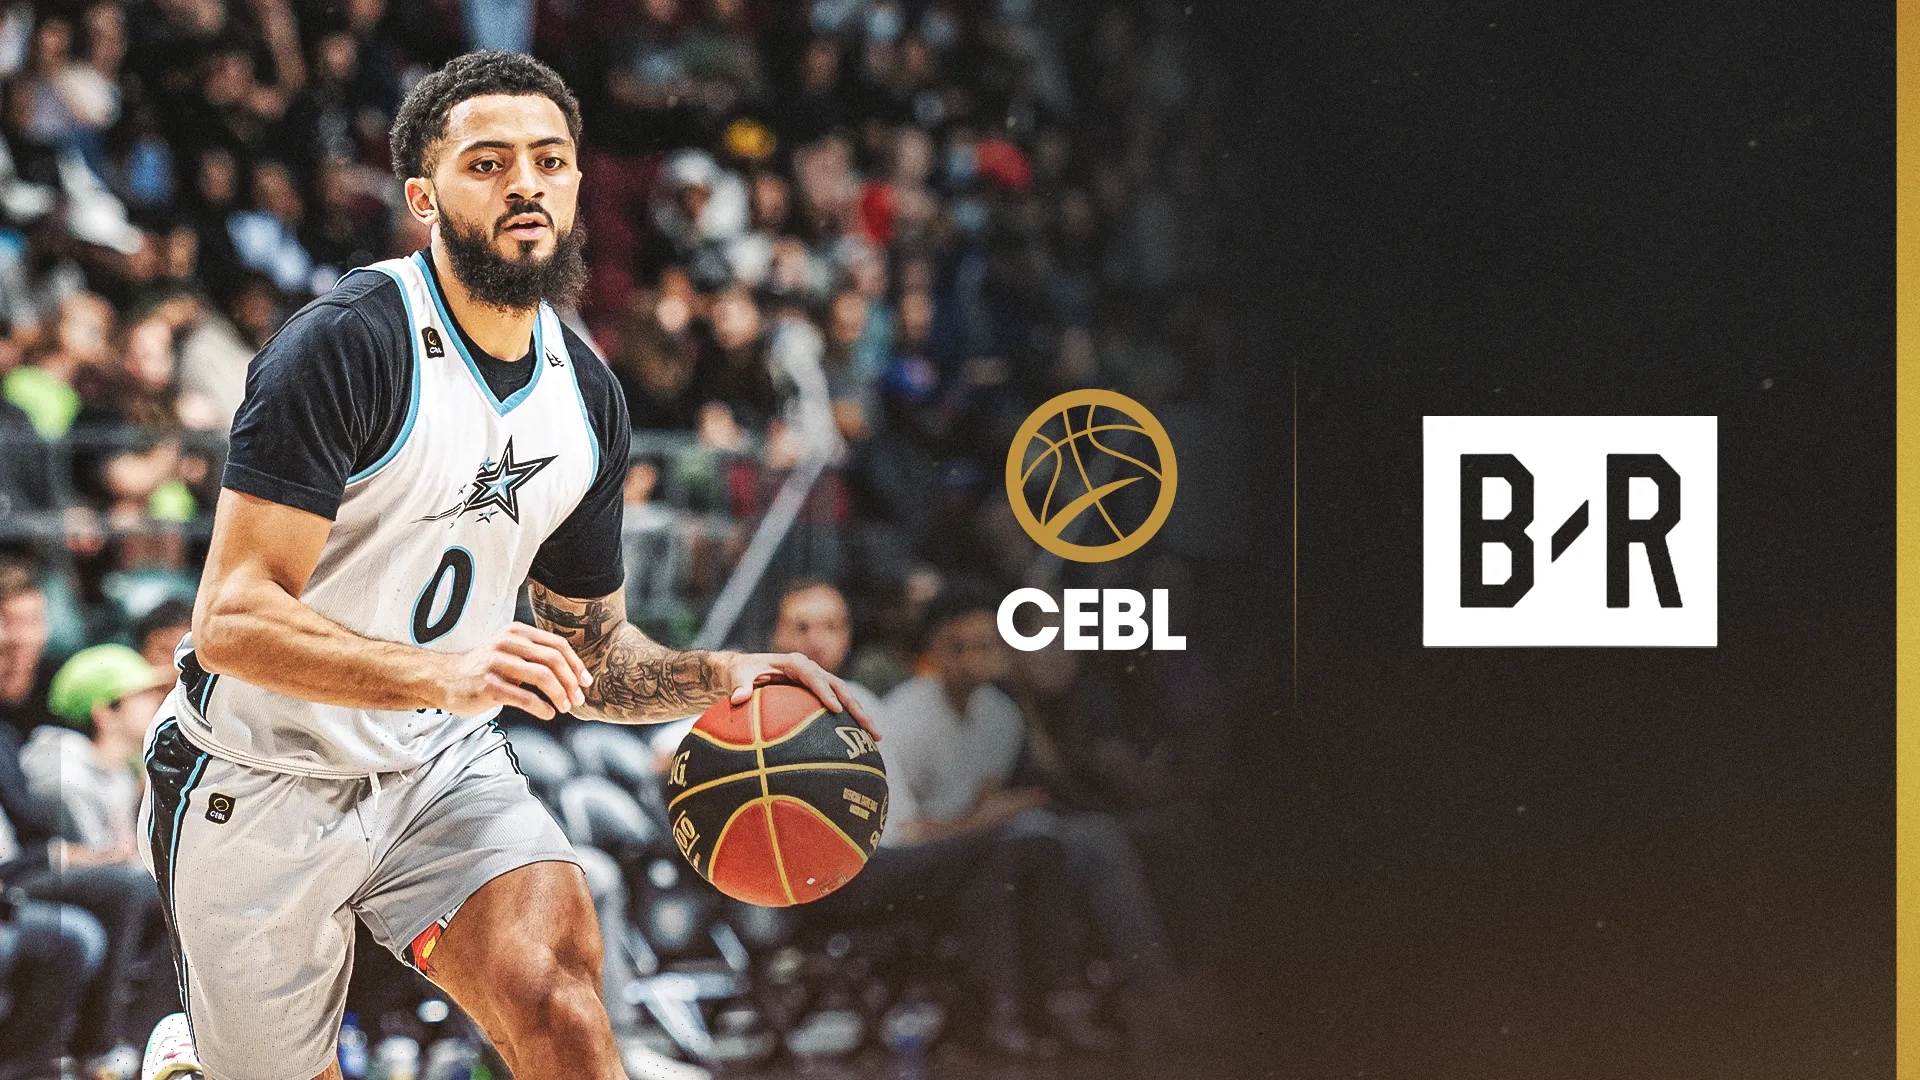 Bleacher Report Exclusively Live Streams Canadian Elite Basketball League Game in the U.S.